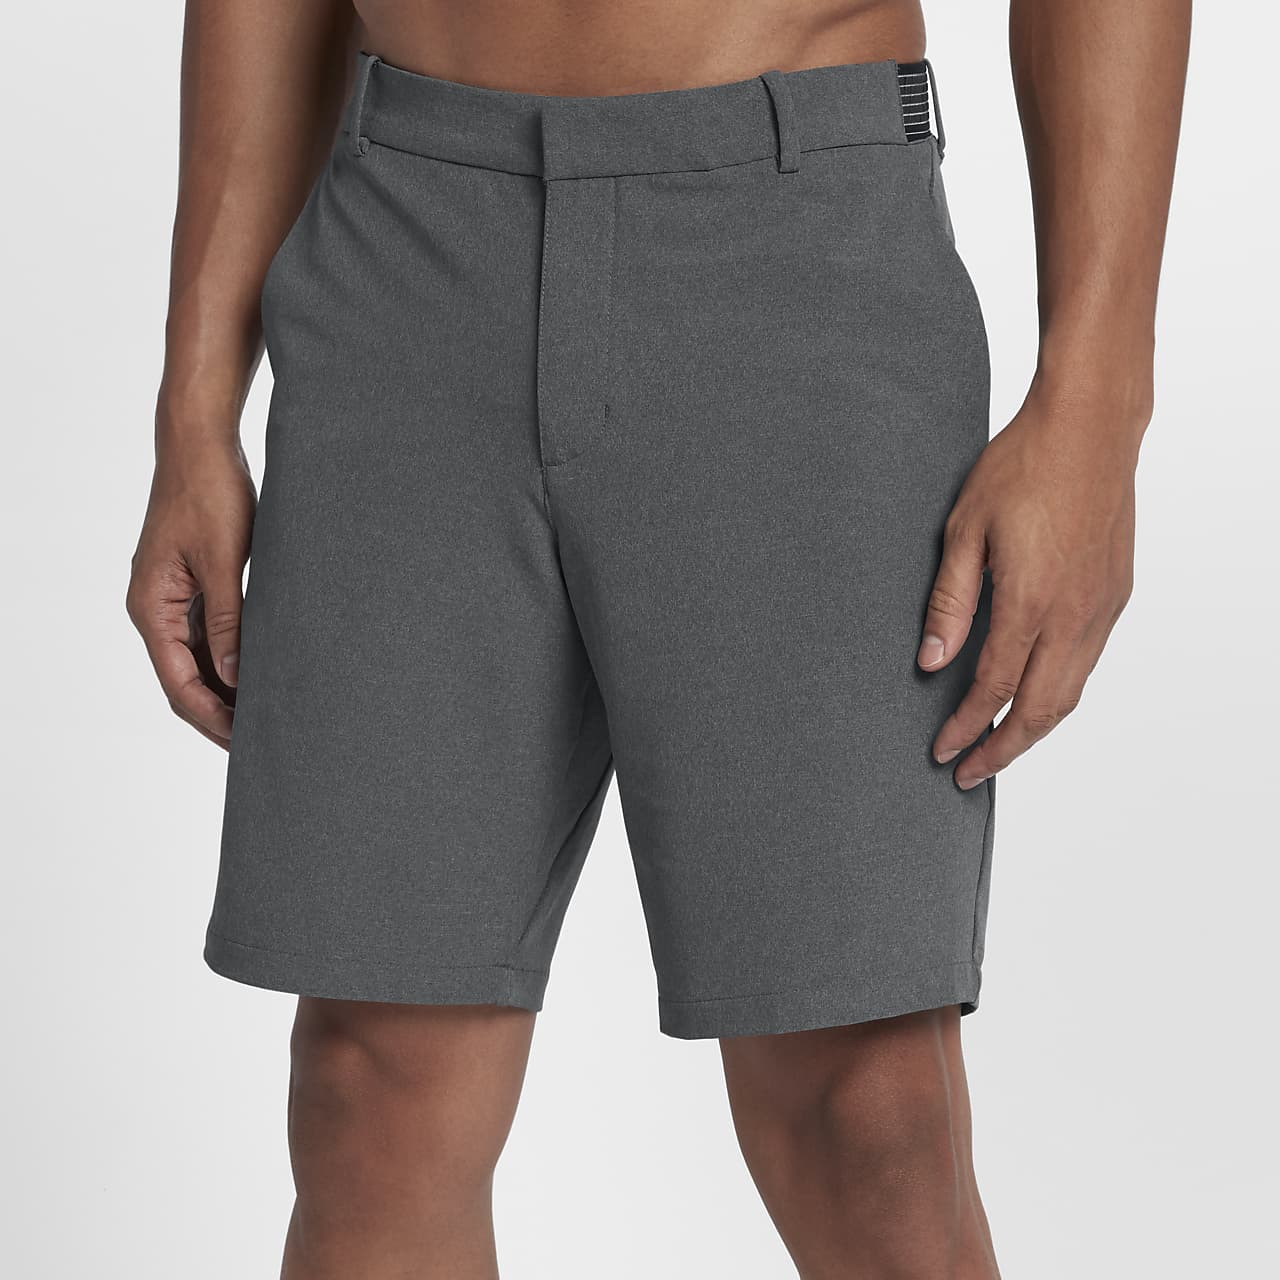 what are slim fit shorts